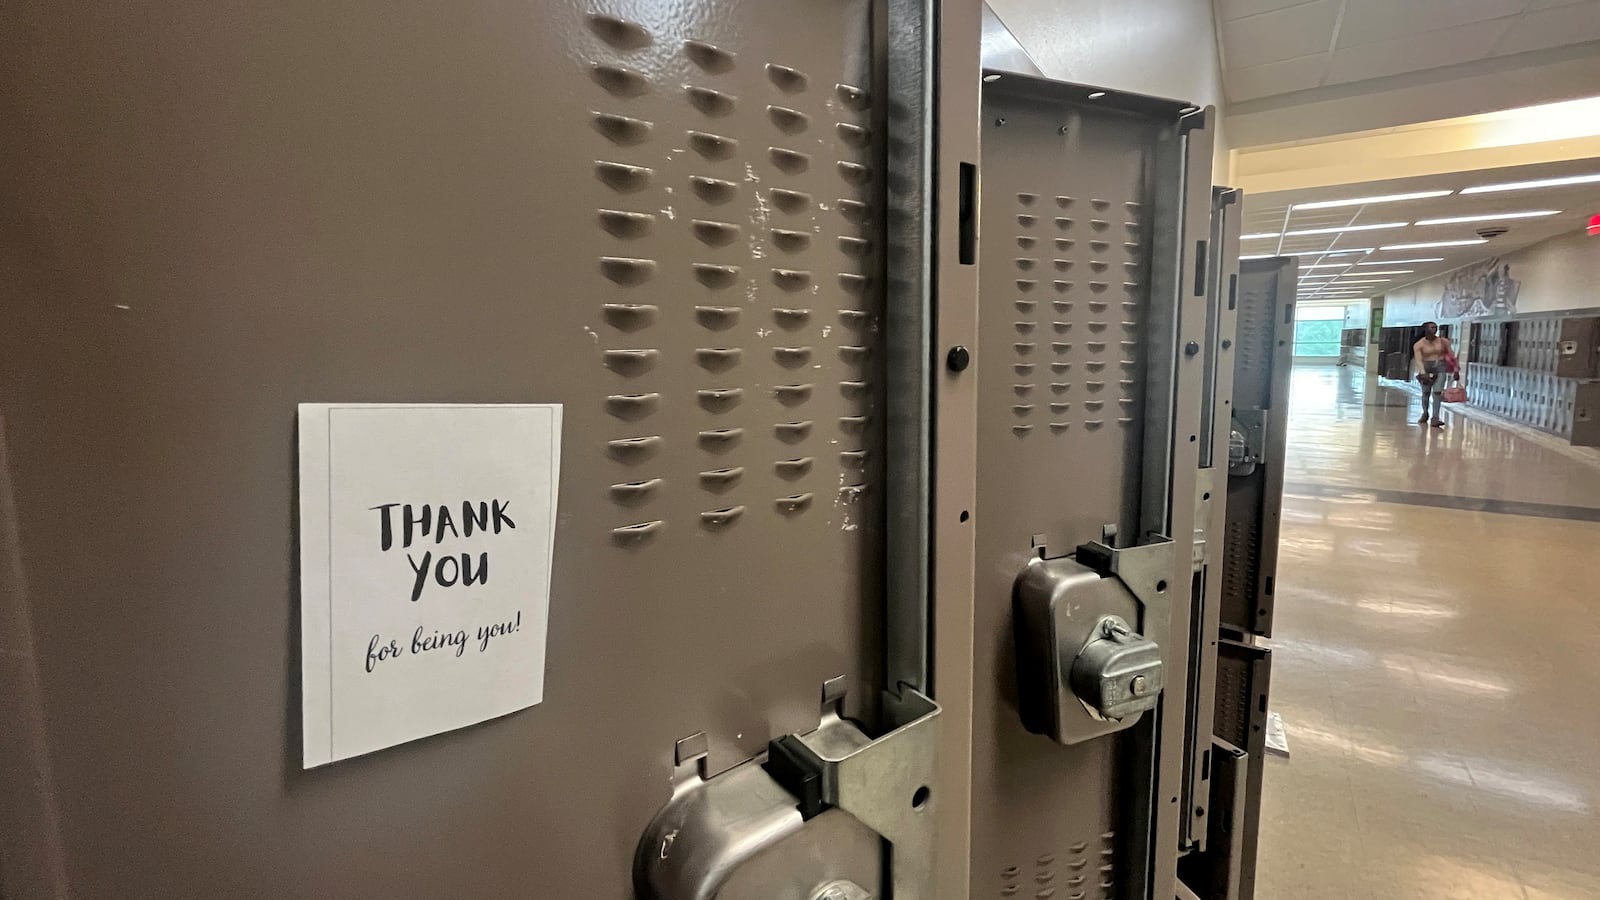 A “Thank You” note on white paper hangs on the inside of a light brown high school locker in the foreground with several lockers in the background while a student walks down the hallway.